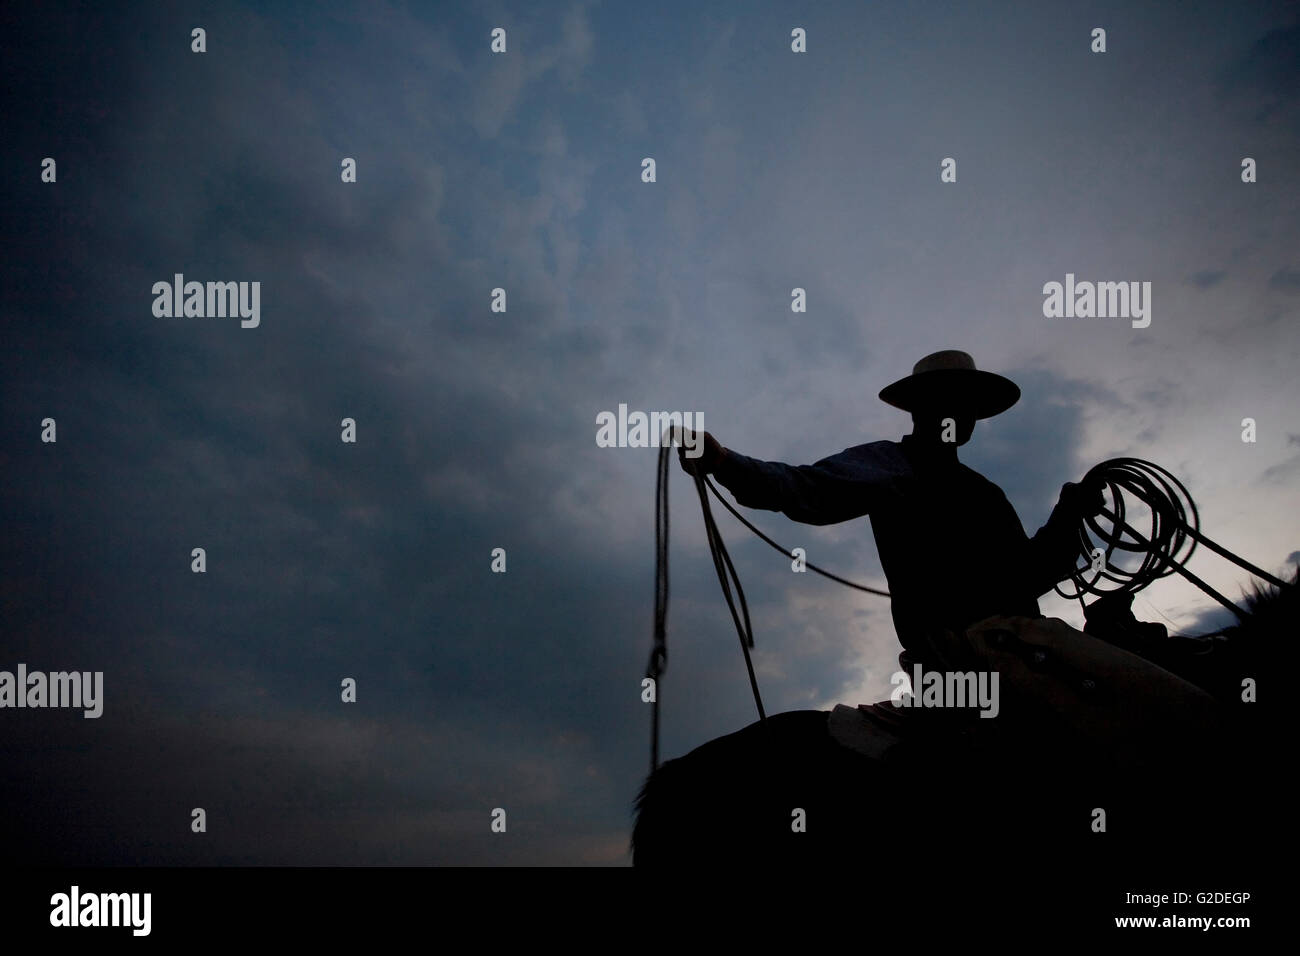 Silhouette of Cowboy with Rope on Horse Stock Photo